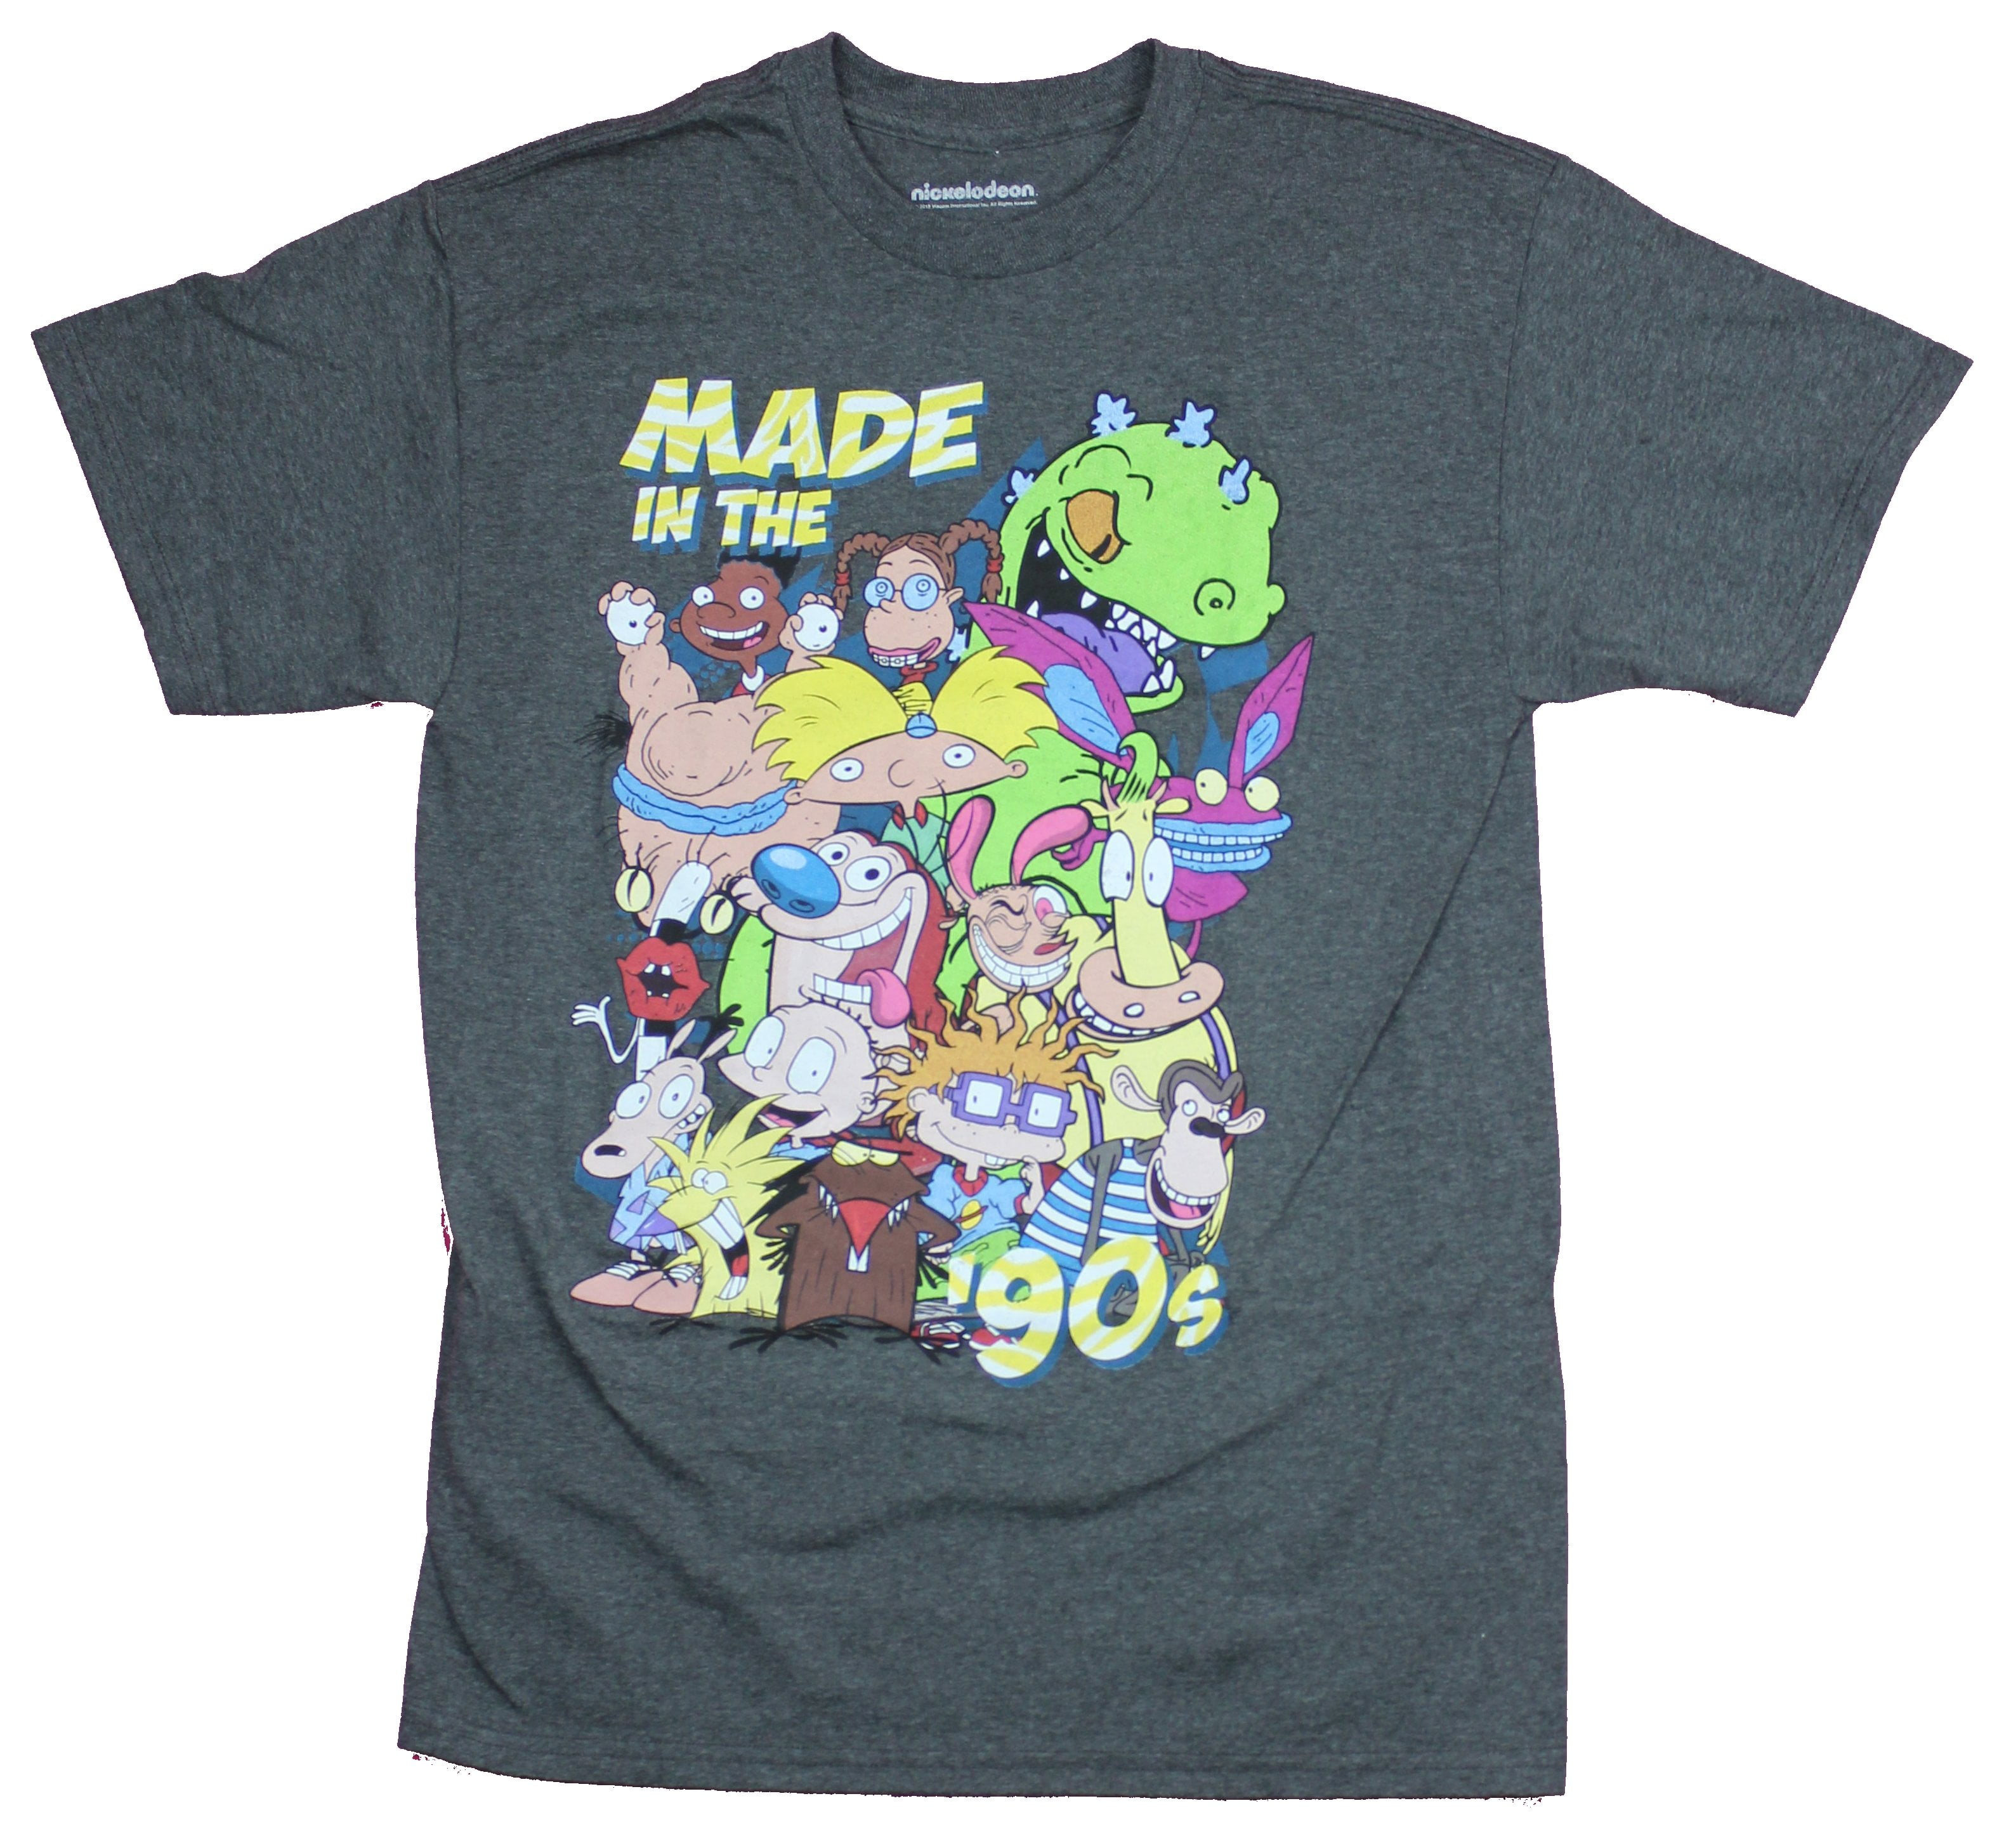 Made in The 90s Short-Sleeve Unisex T-Shirt